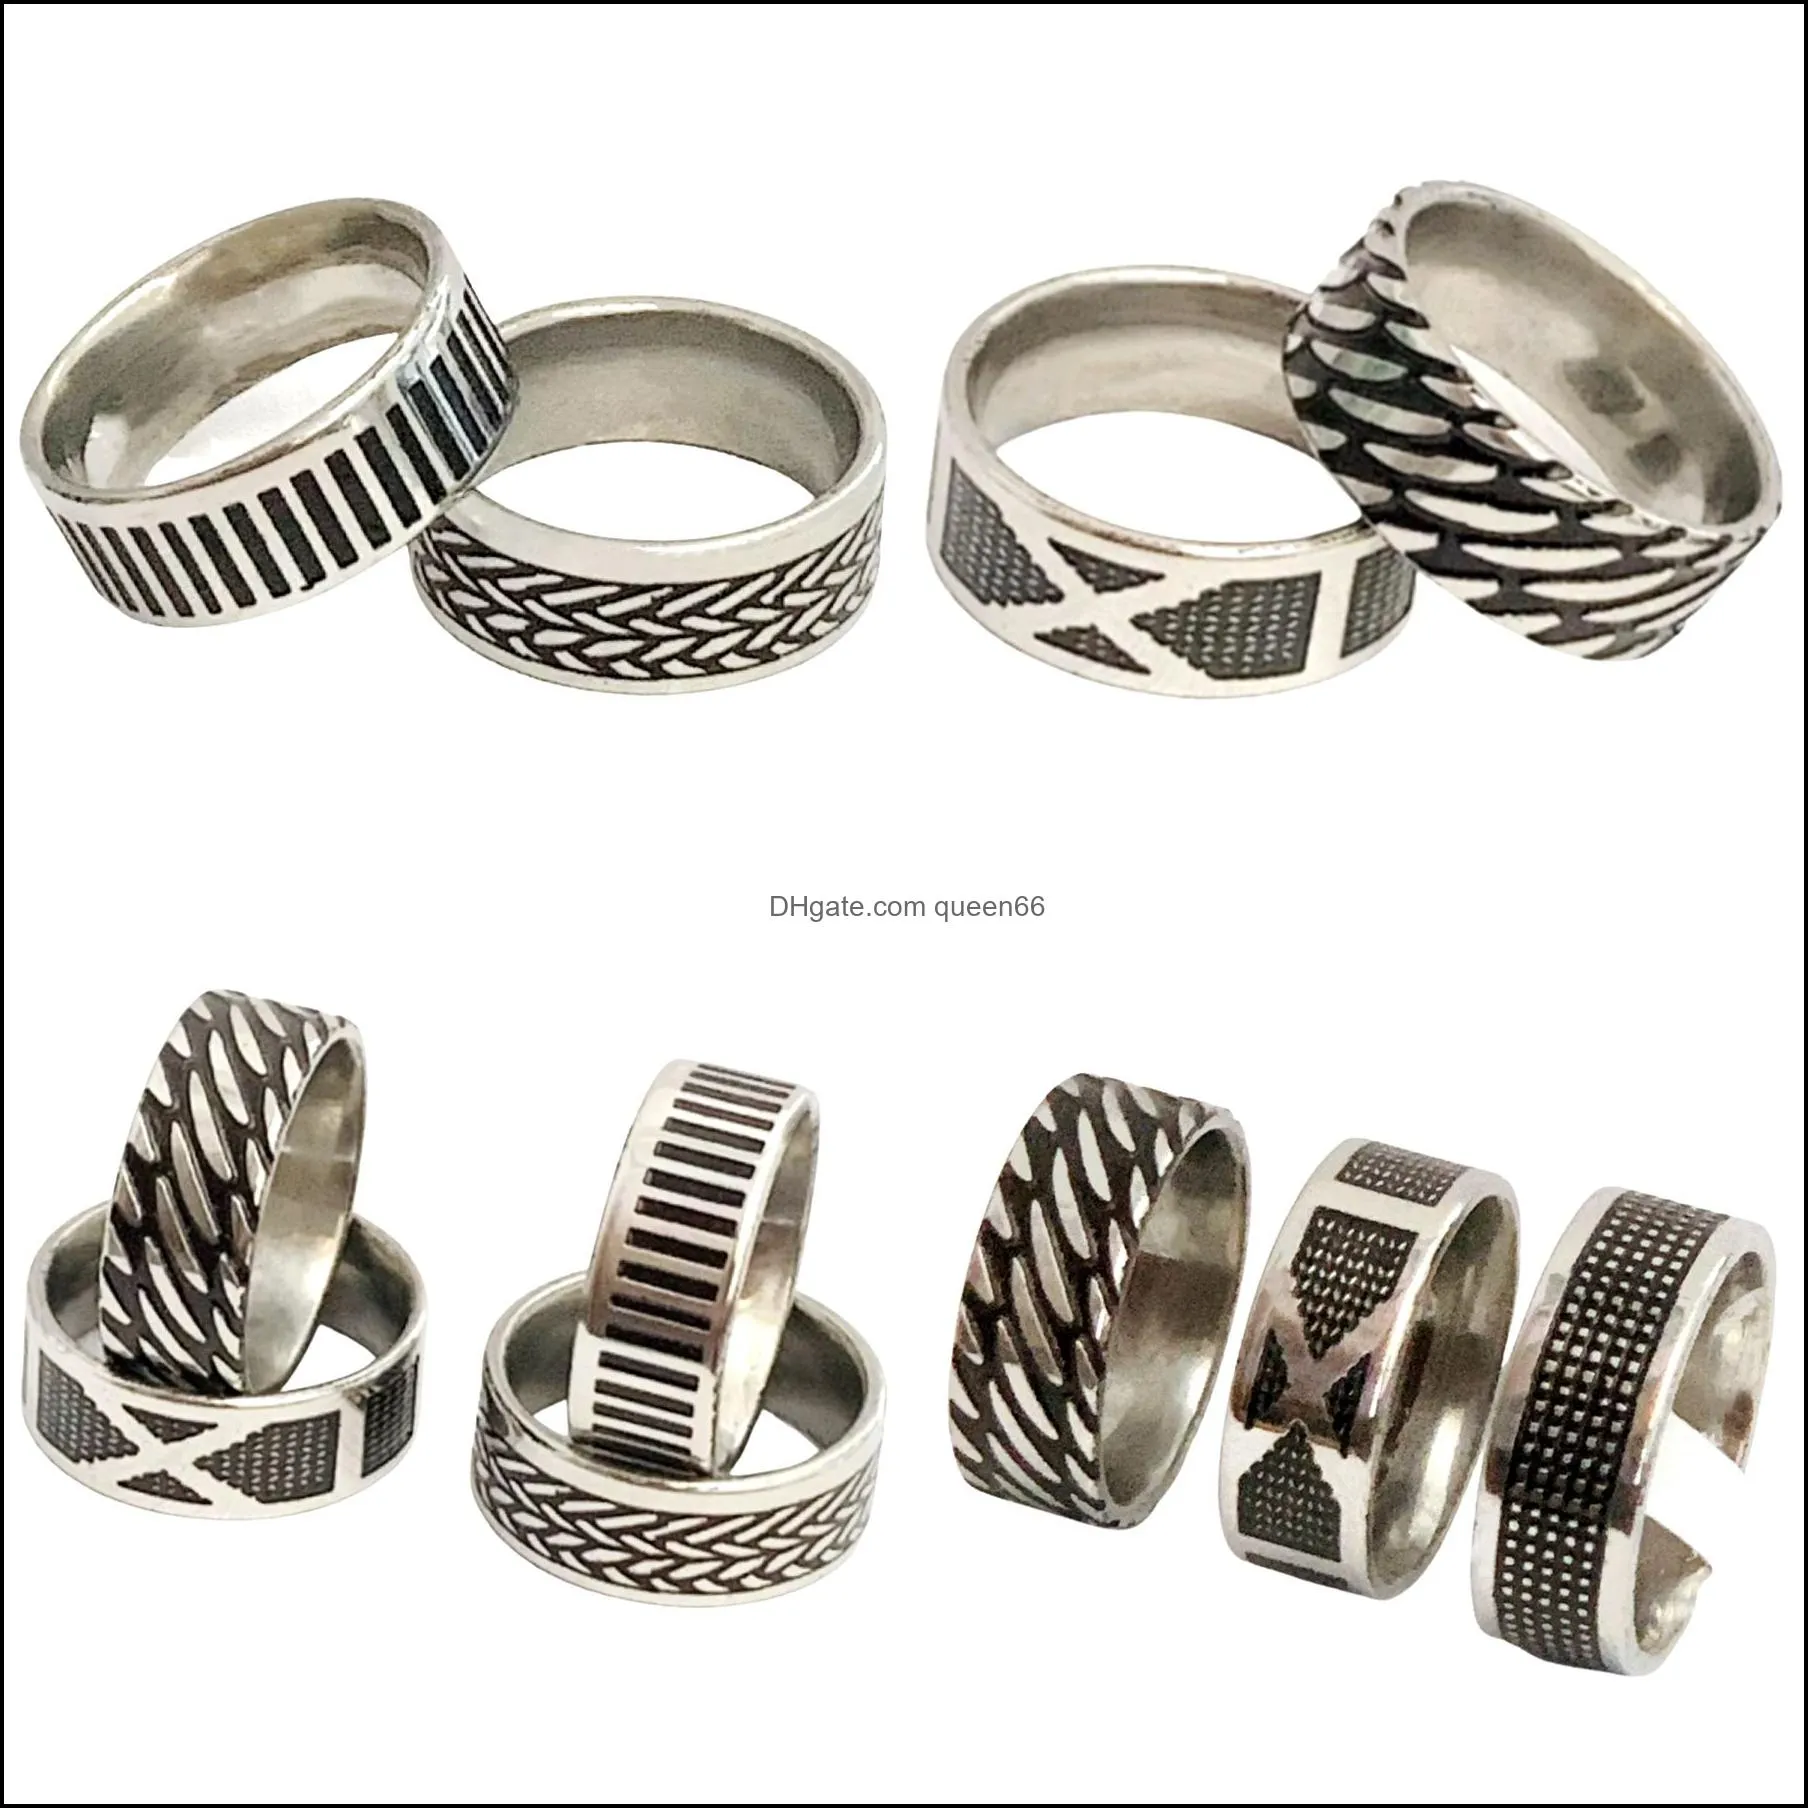 30pcs bulk classic punk men wedding band rings stainless steel jewelry accessory hip hop rock street fashion gifts wholesale